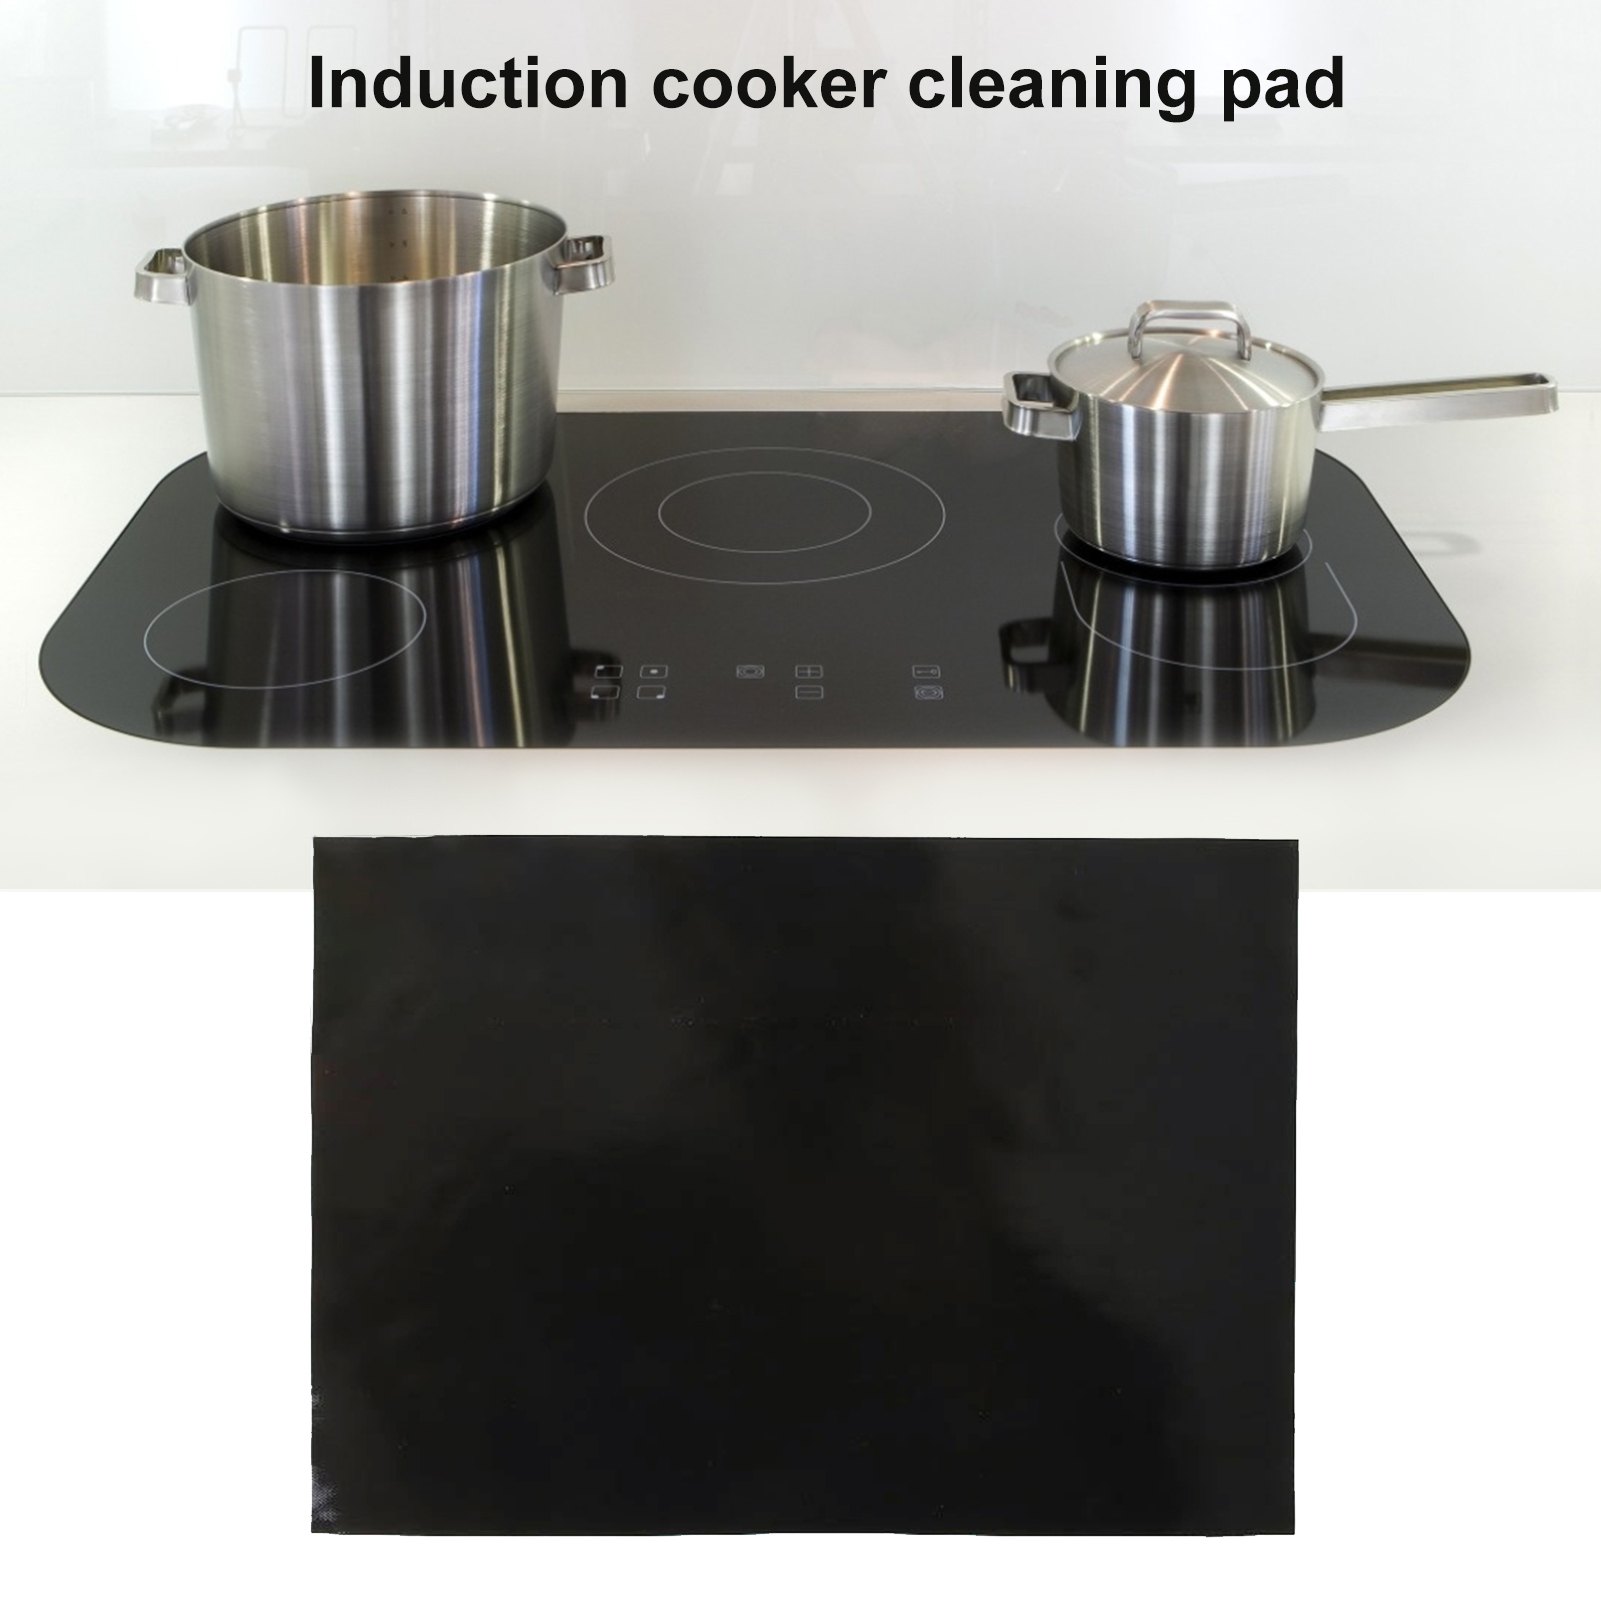 Mat Non-Slip Heat Insulated Silicone Induction Cooker Pad